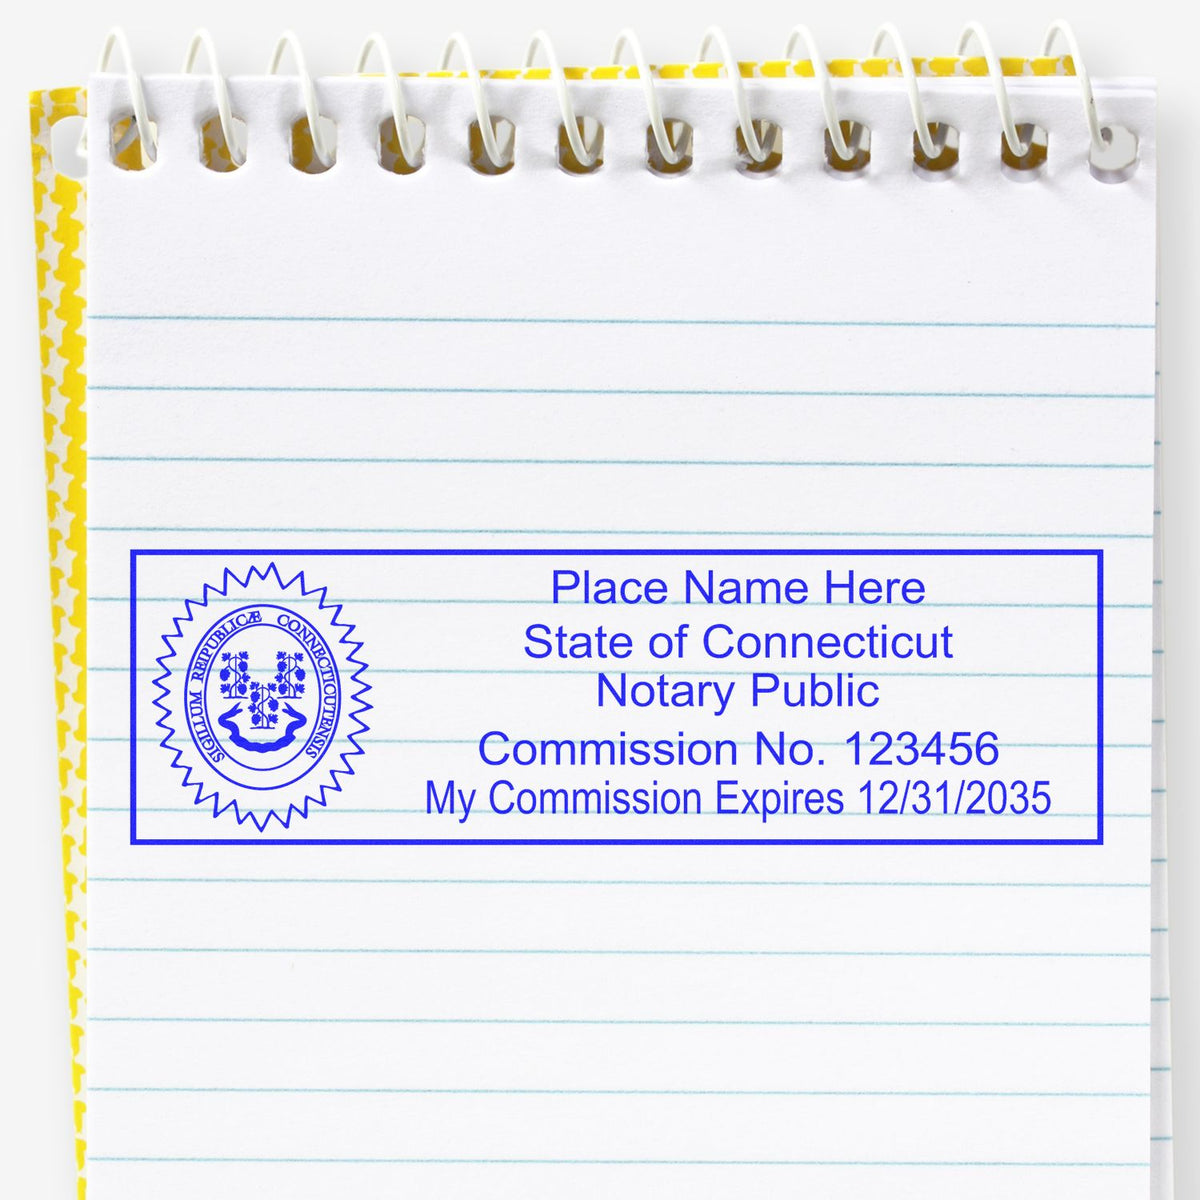 The MaxLight Premium Pre-Inked Connecticut State Seal Notarial Stamp stamp impression comes to life with a crisp, detailed photo on paper - showcasing true professional quality.